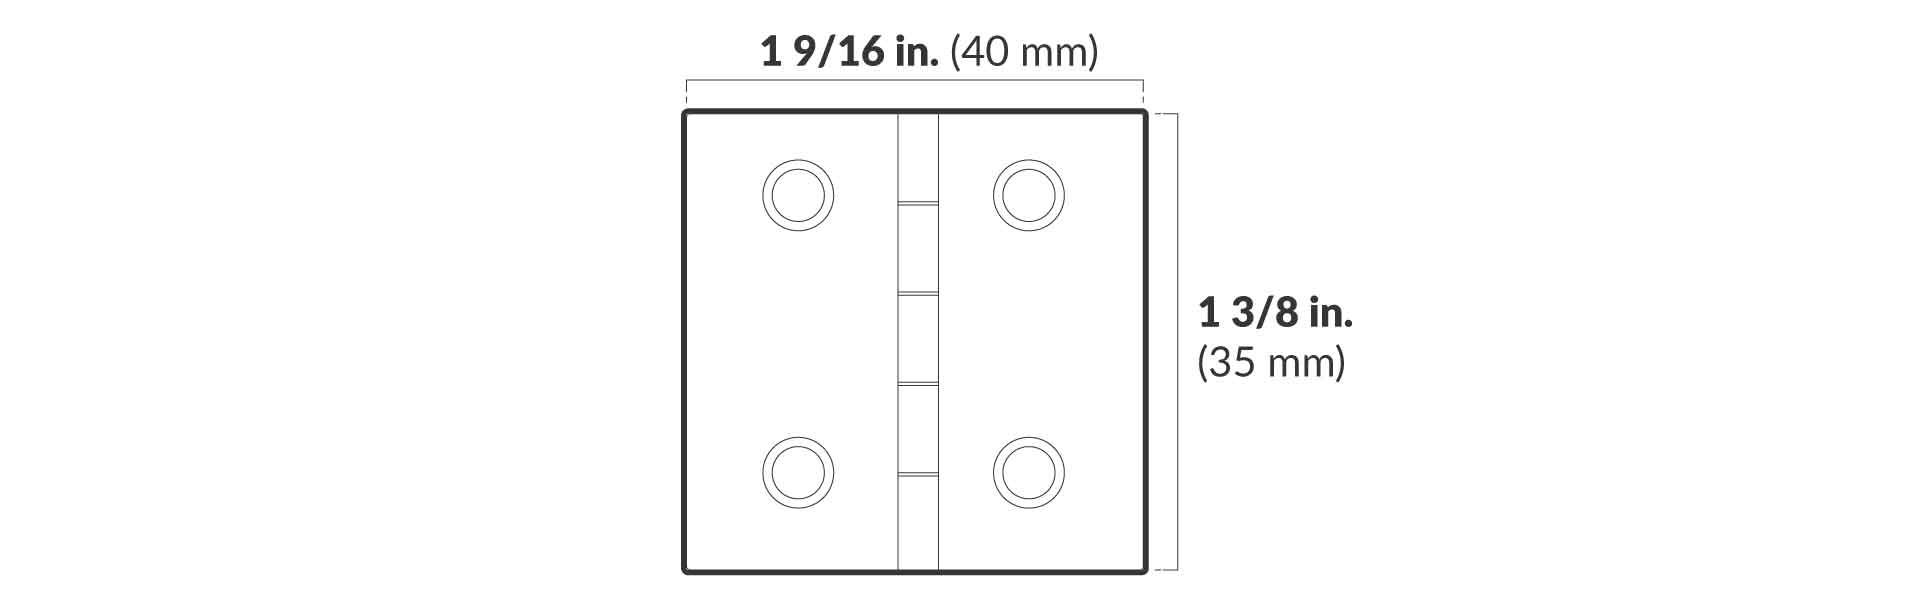 product_dimensions